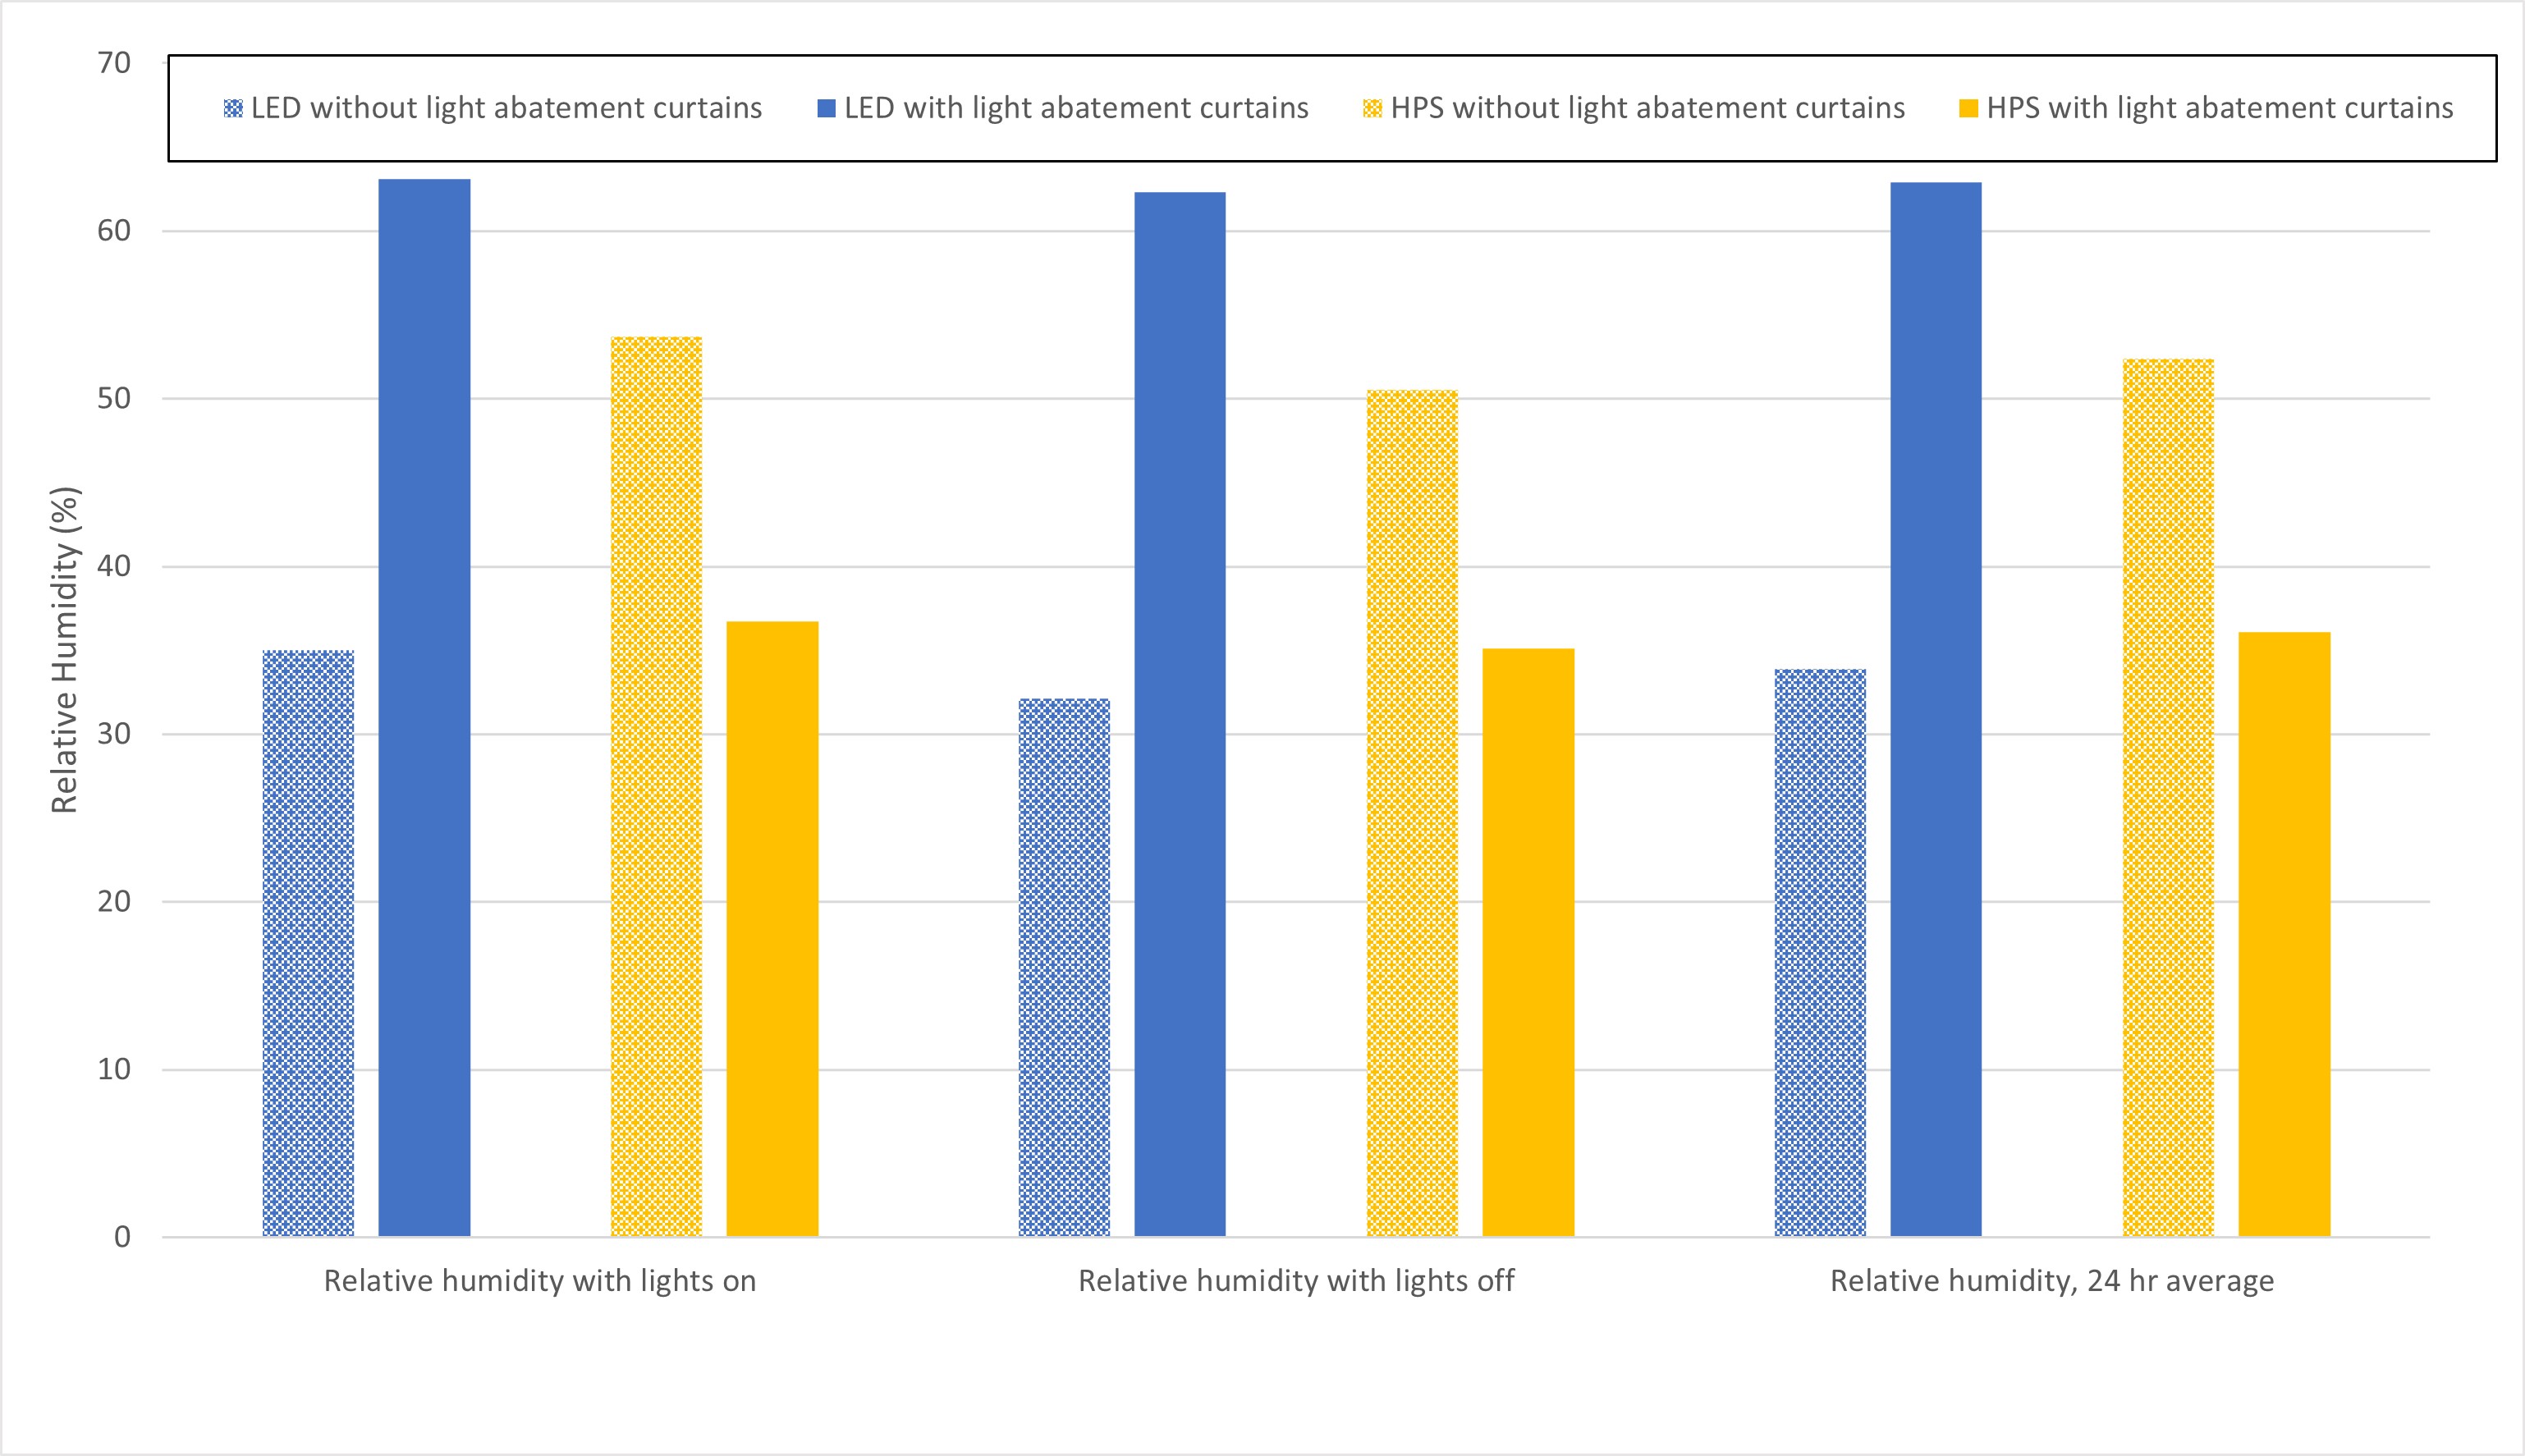 Bar graph showing relative humidity with lights on and off and as an average with and without light abatement curtains.